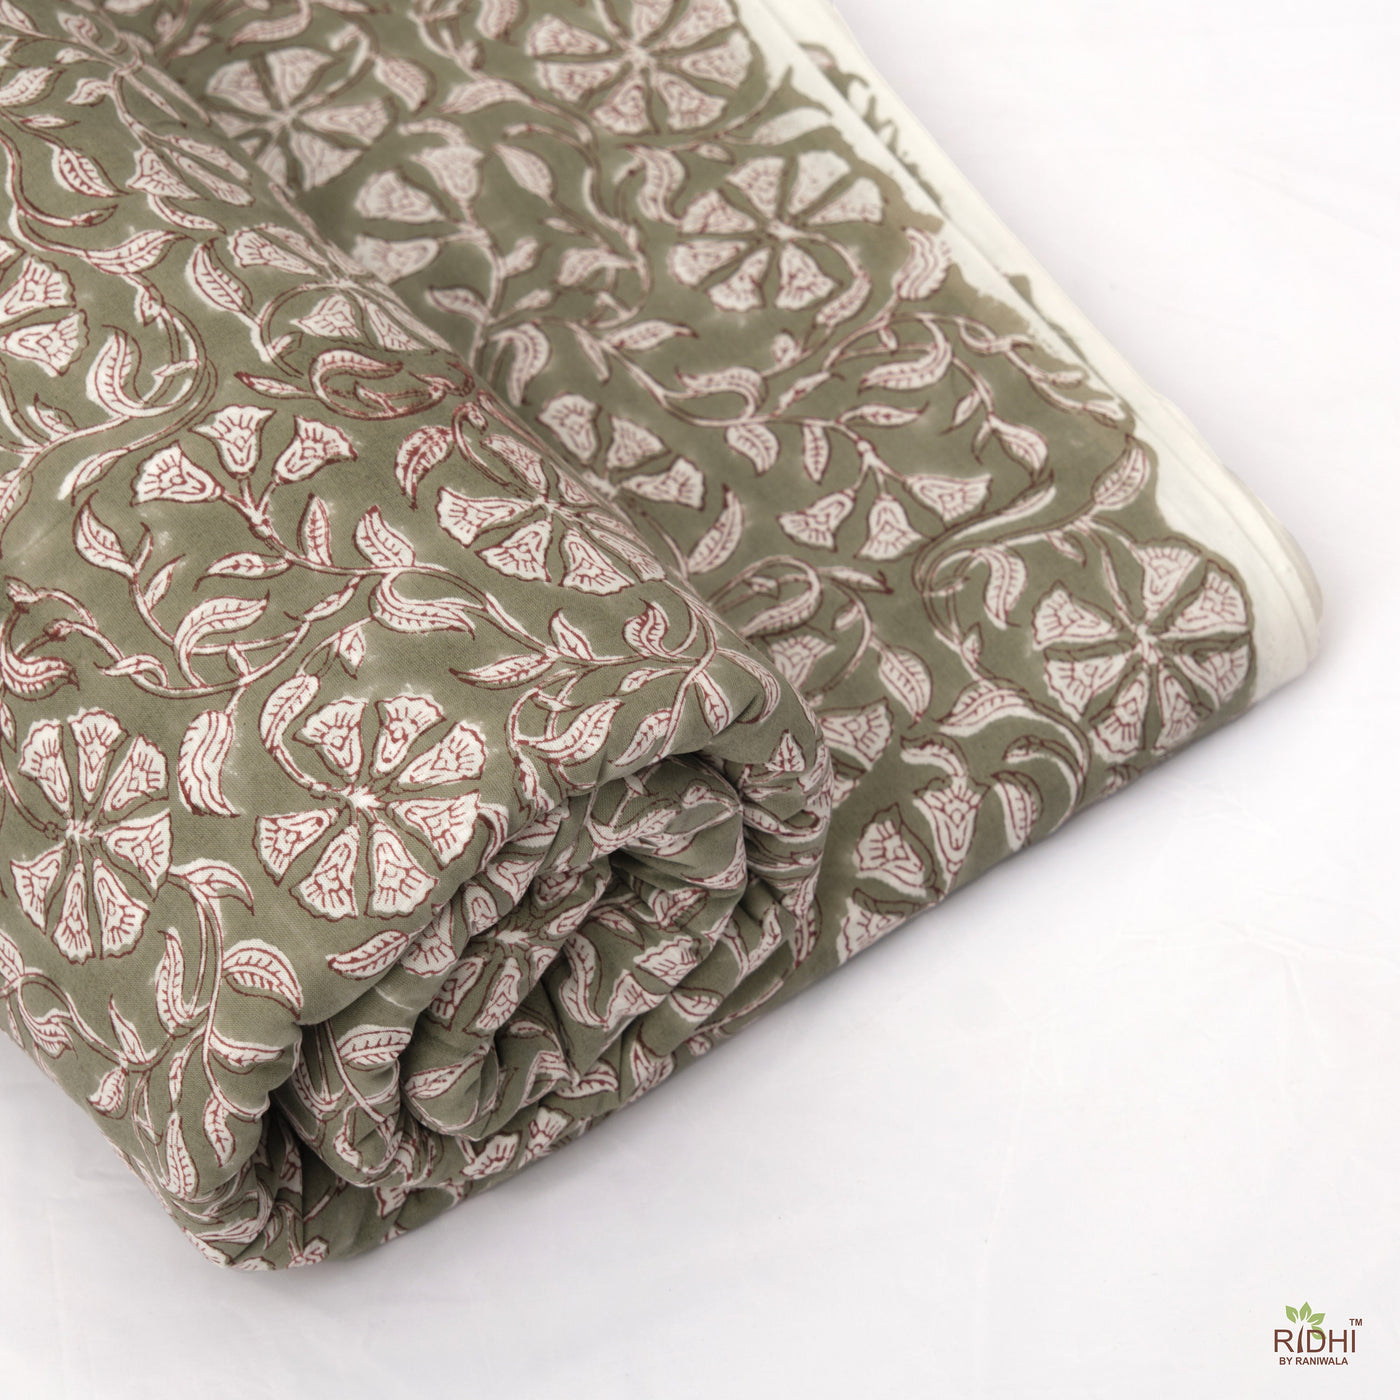 Artichoke Green and White Indian Floral Hand Block Printed 100% Pure Cotton Cloth, Fabric by the yard, Women's Clothing Curtains Duvet Cover